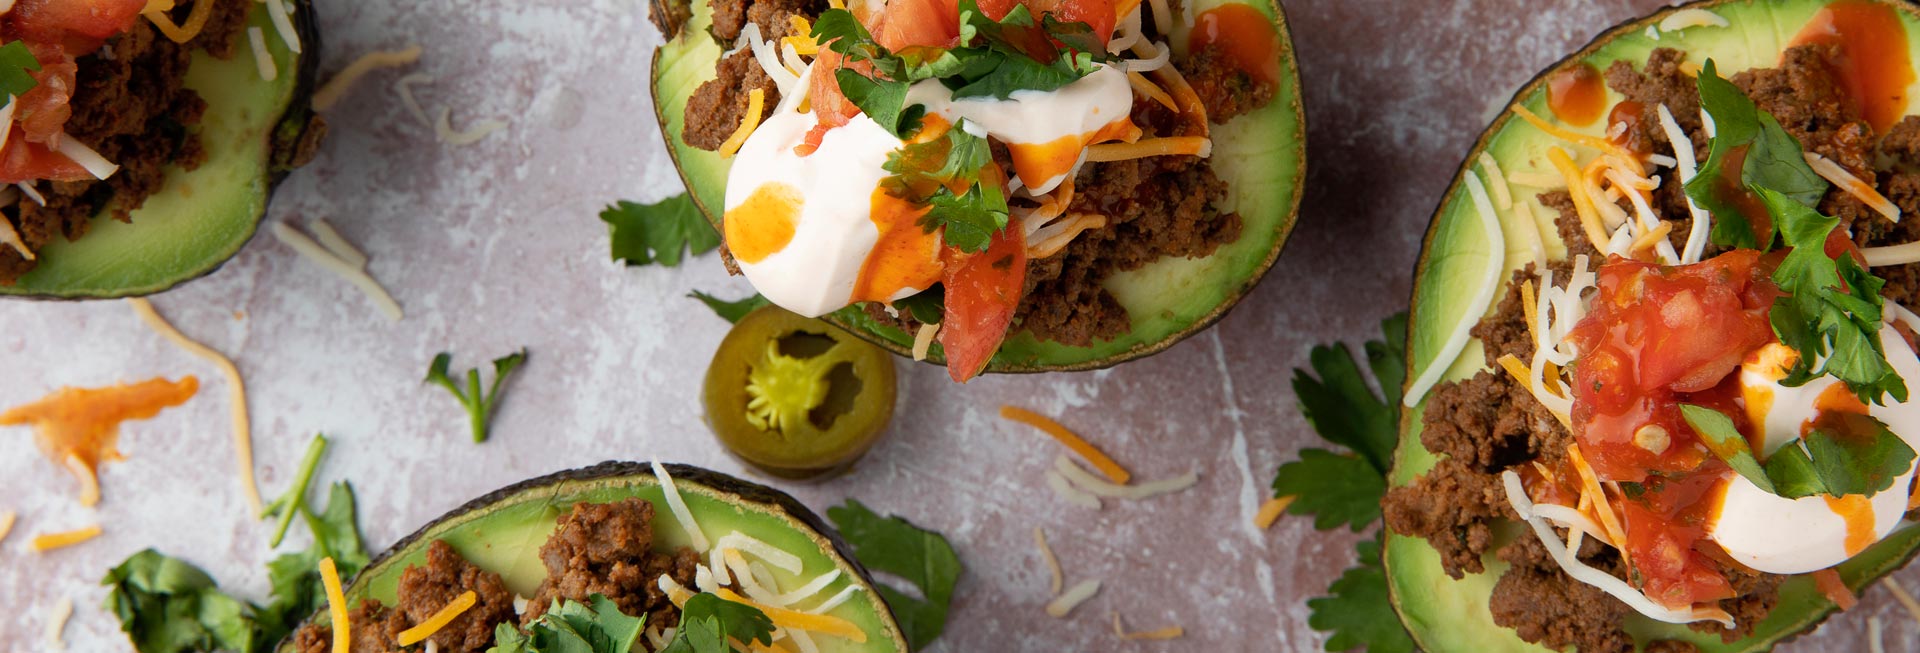 Taco Stuffed Avocados with Spicy Sour Cream